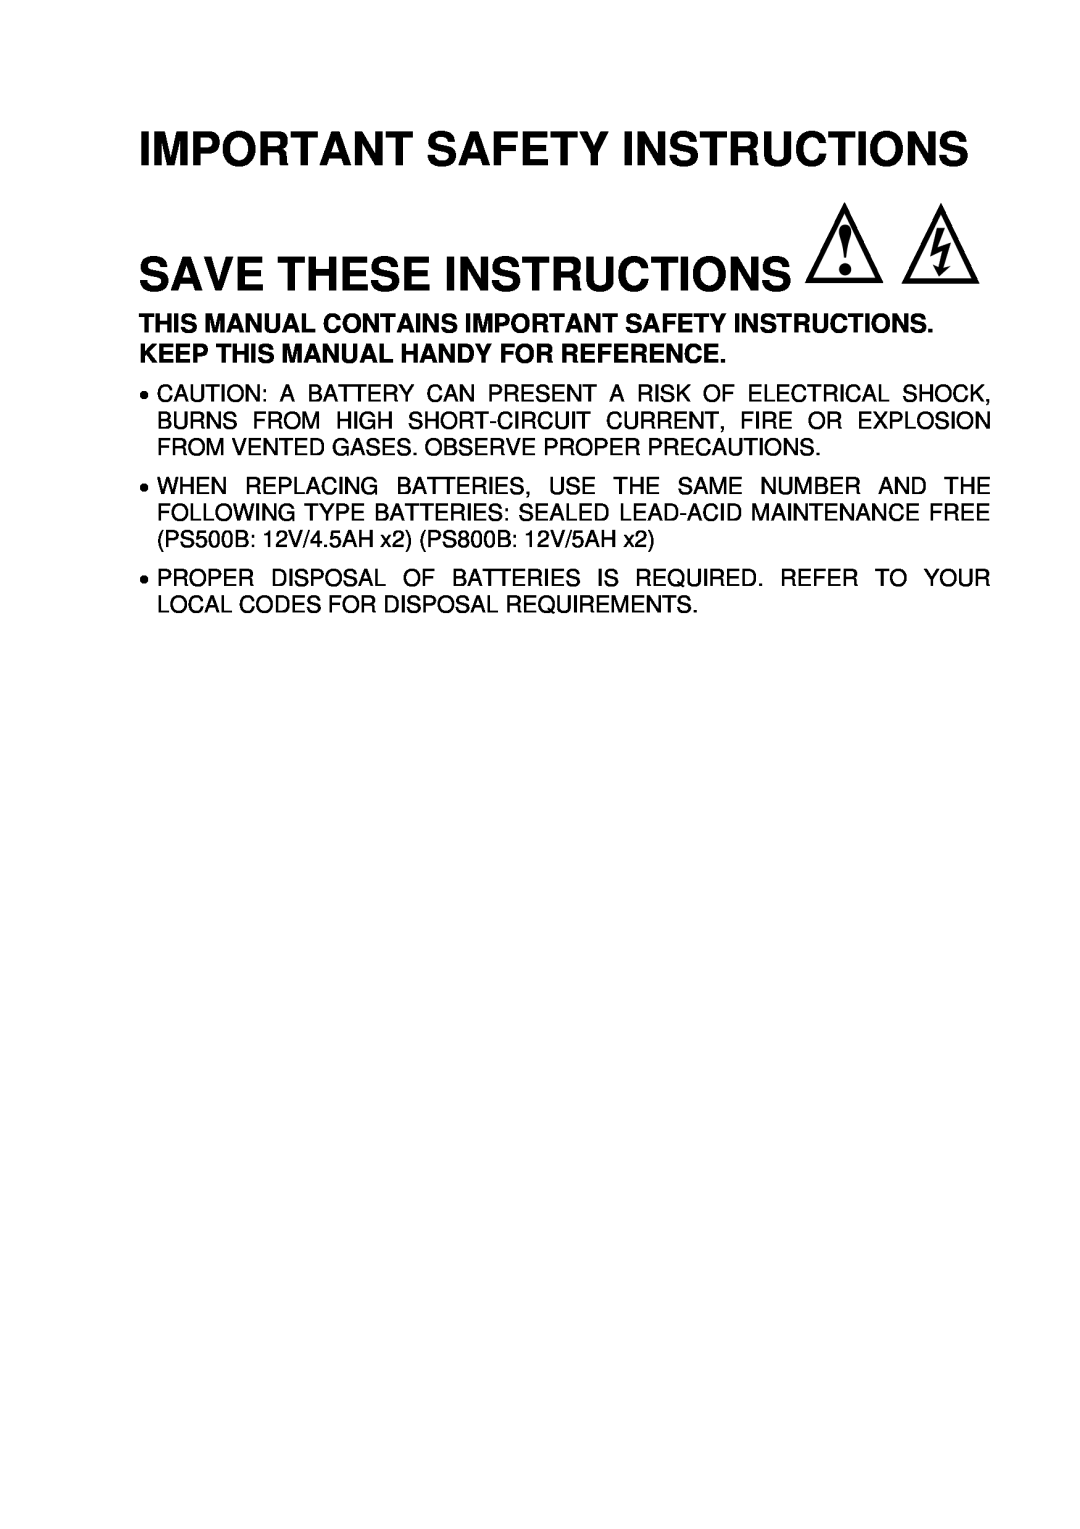 ViewSonic PS500B, PS800B manual Important Safety Instructions, Save These Instructions 